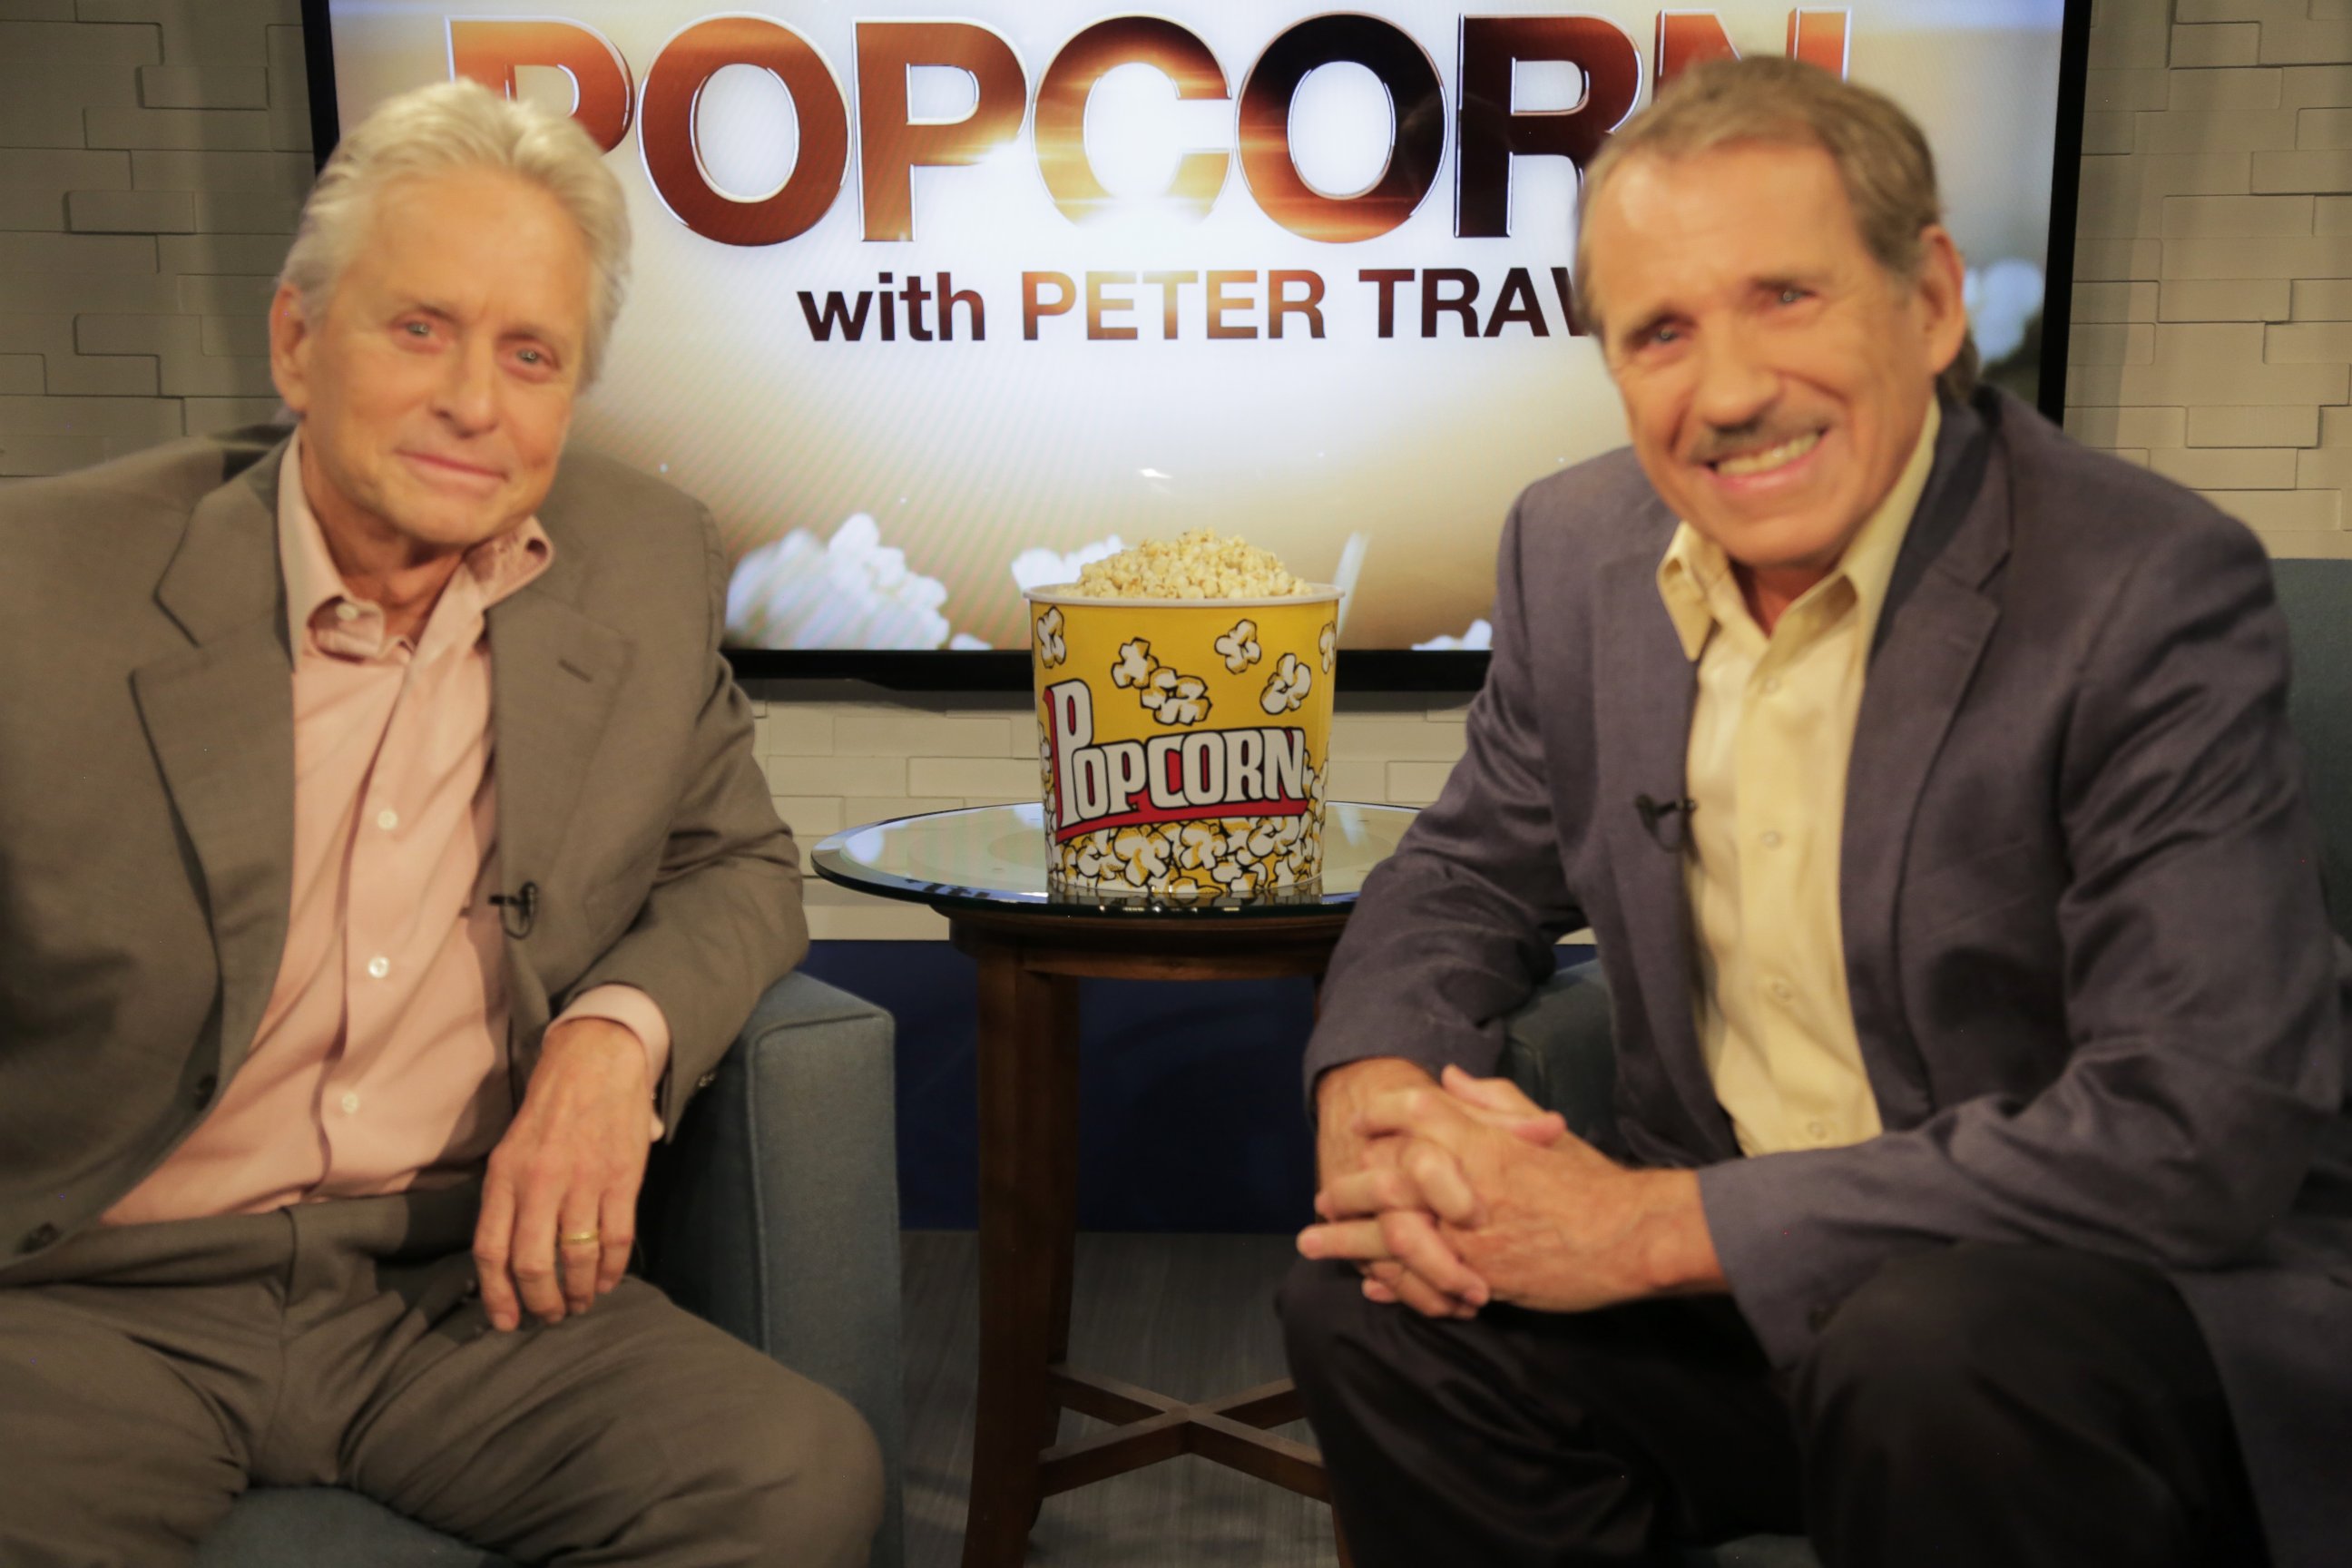 PHOTO: Michael Douglas talks to Peter Travers about leading the good life